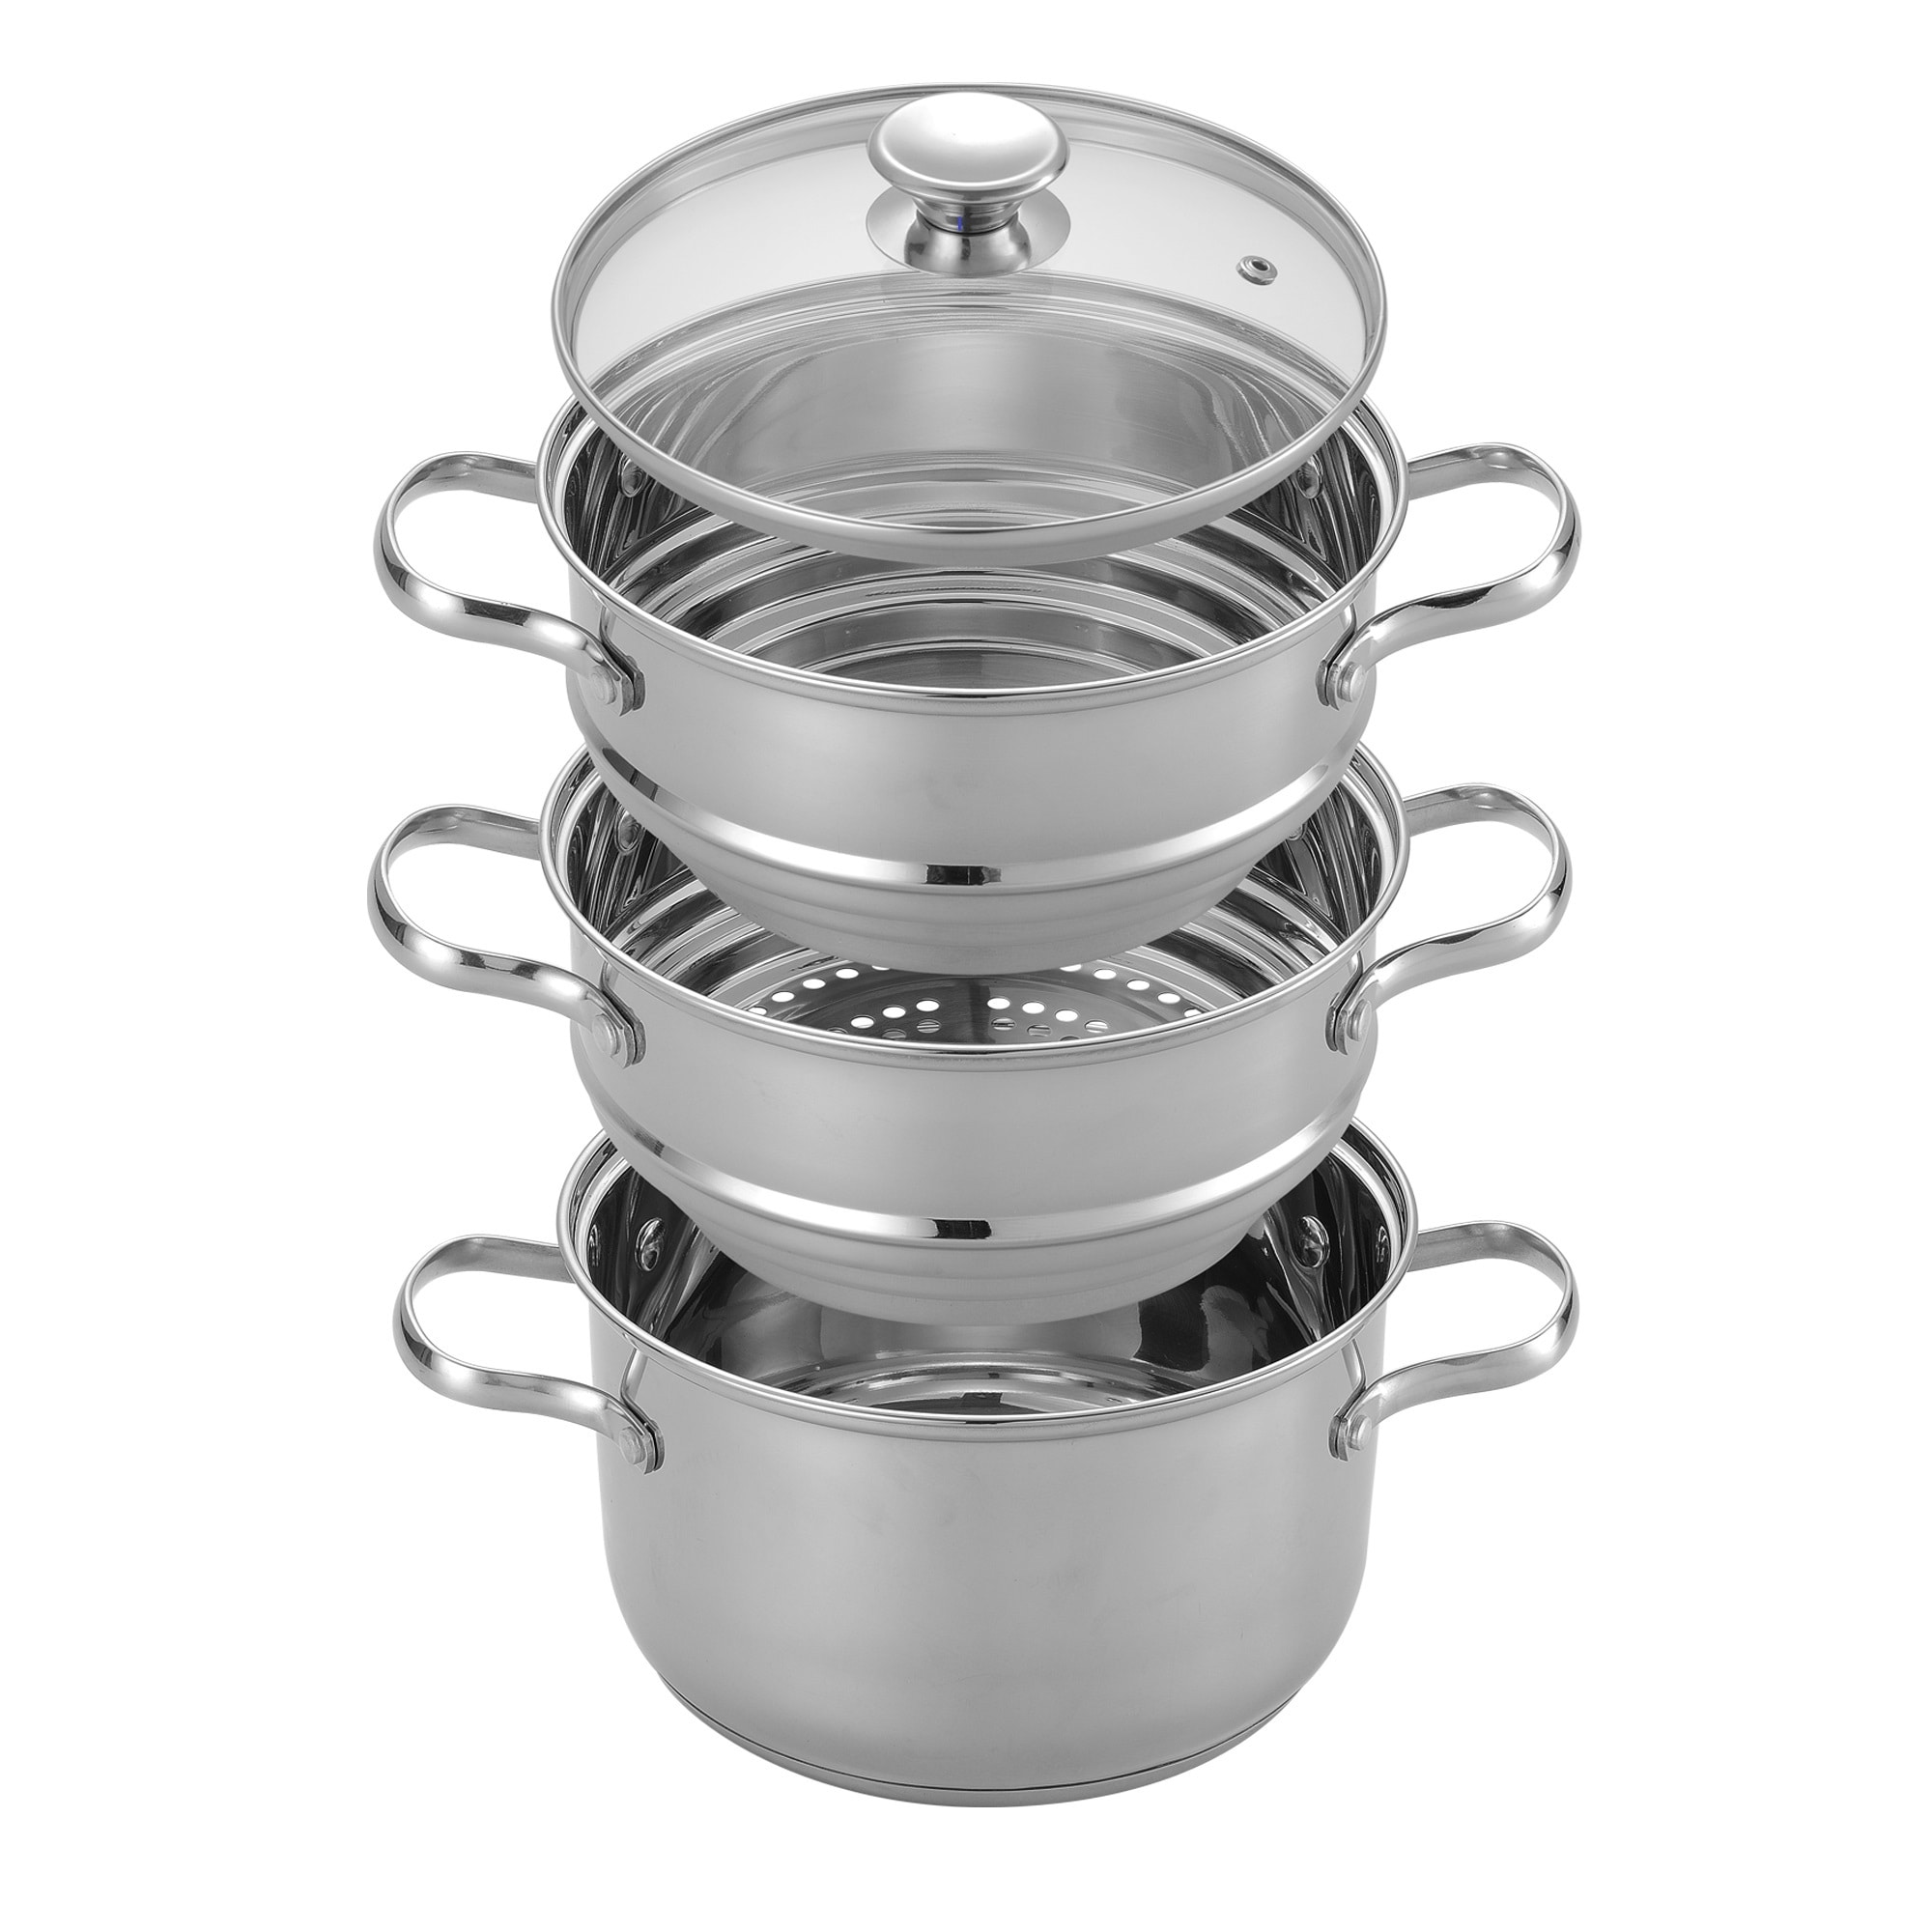 NC-00313 4QT 20CM Double Boiler and Steamer Set Stainless Steel 